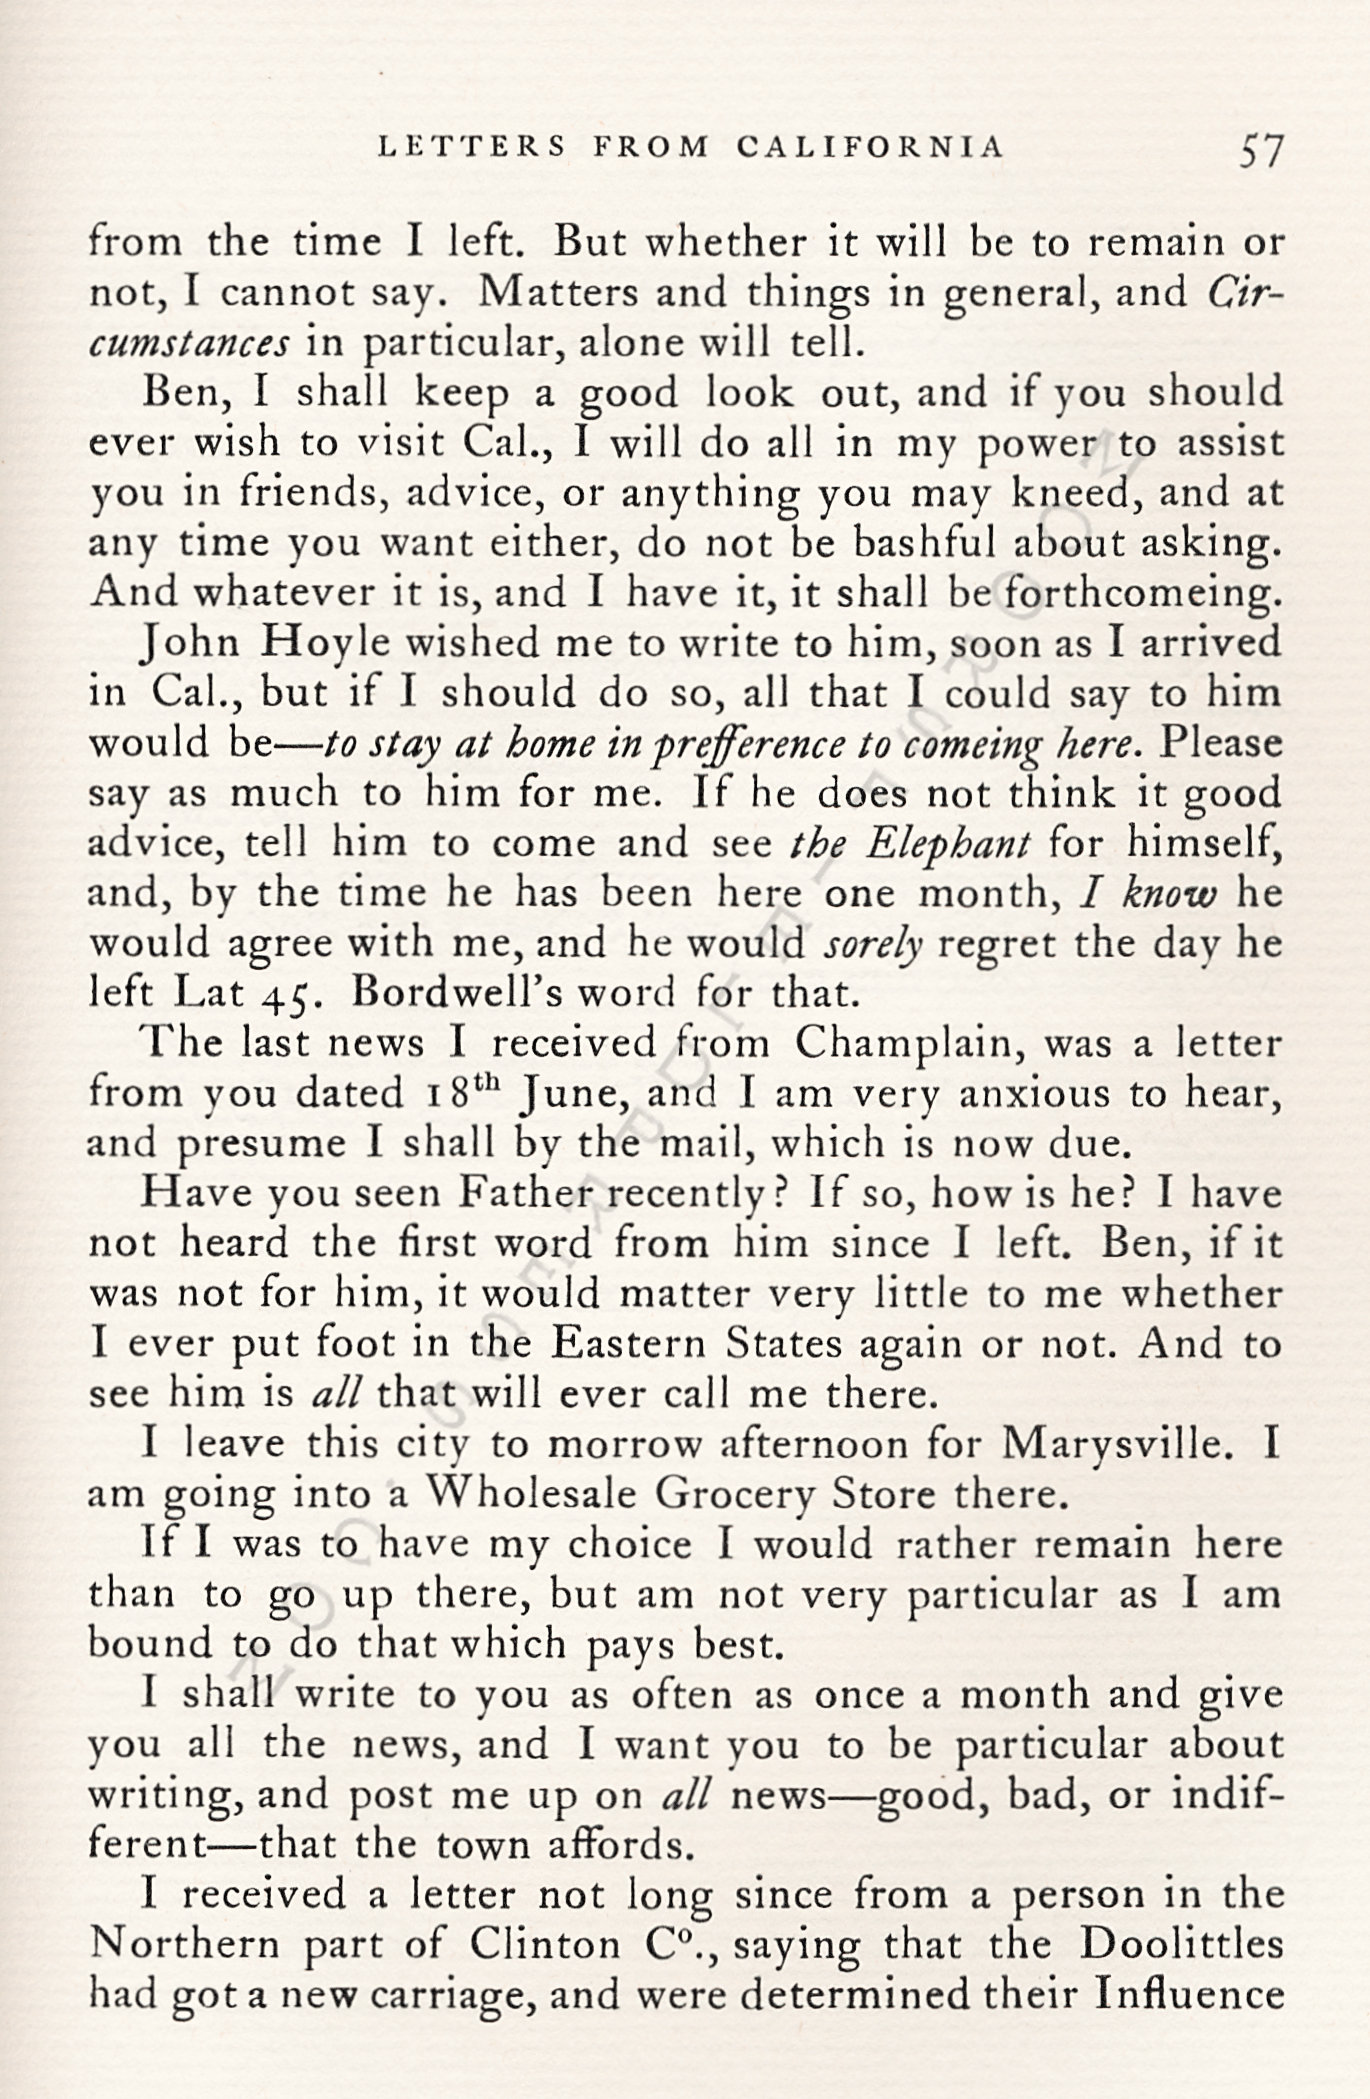 Letters
                      from California-1852-59-Wallace W. Bordwell to
                      Benjamin Booth of Champlain New York